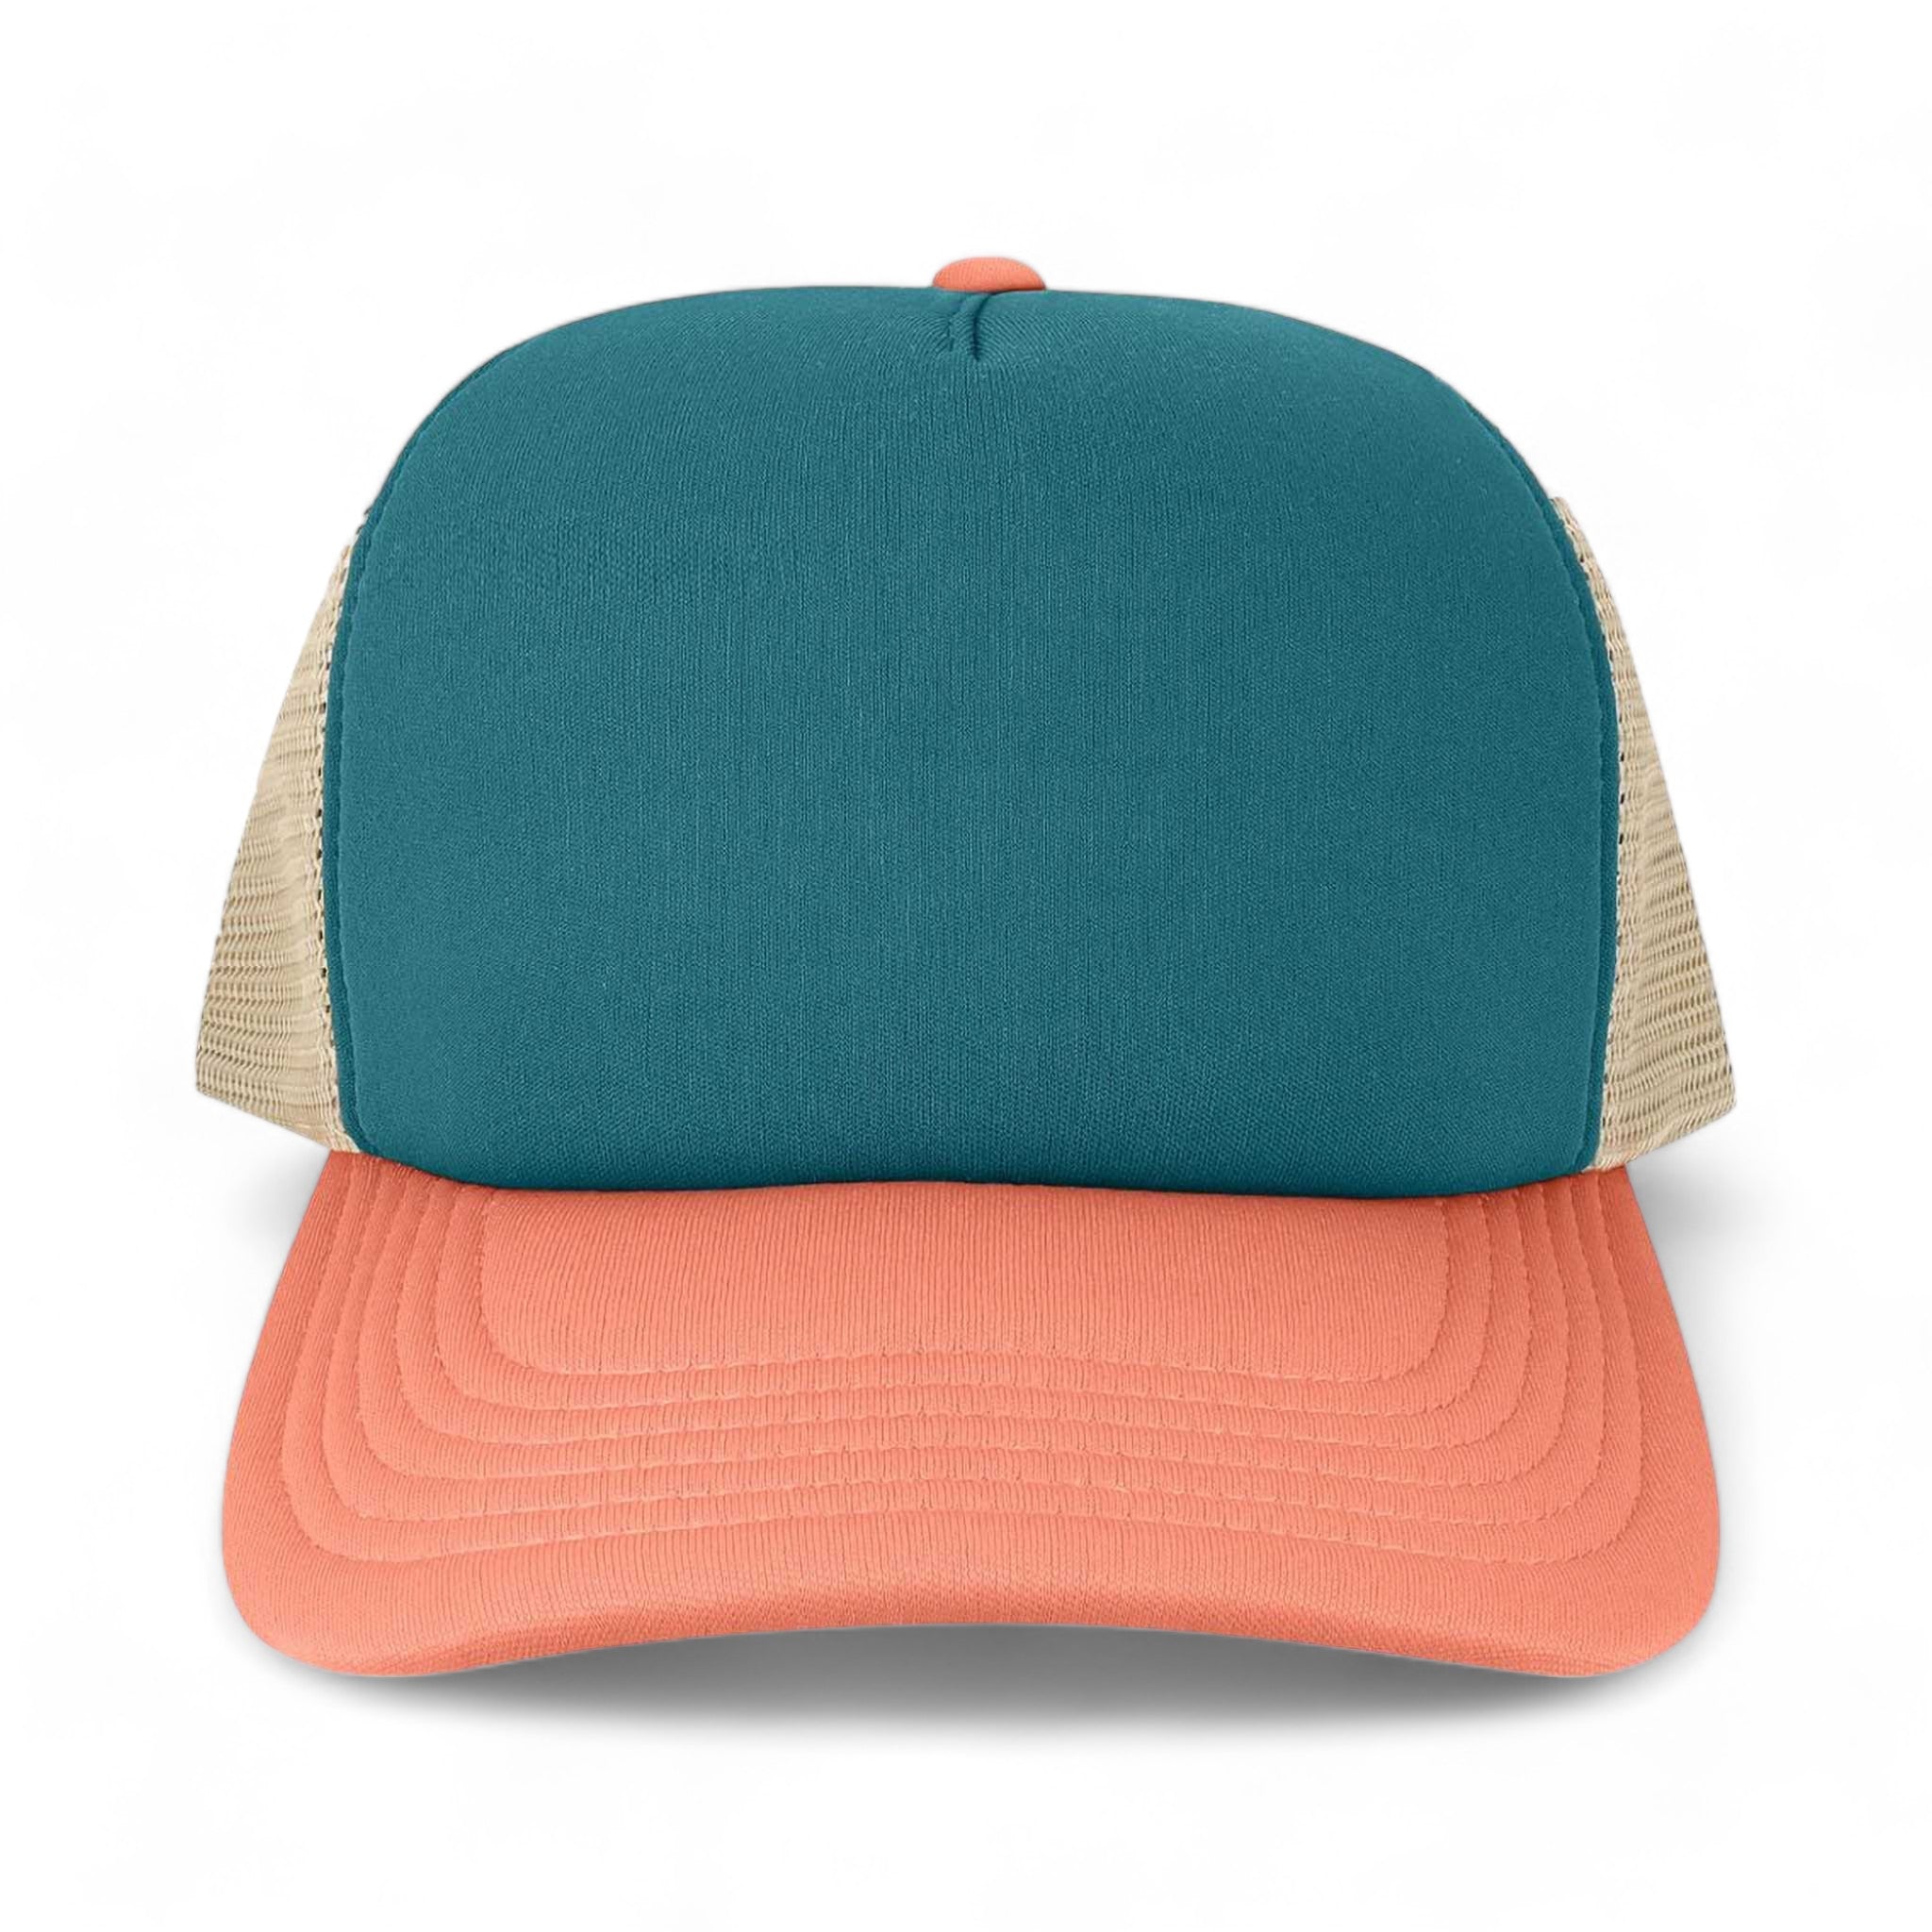 Front view of LEGACY LTA custom hat in marine, salmon and khaki